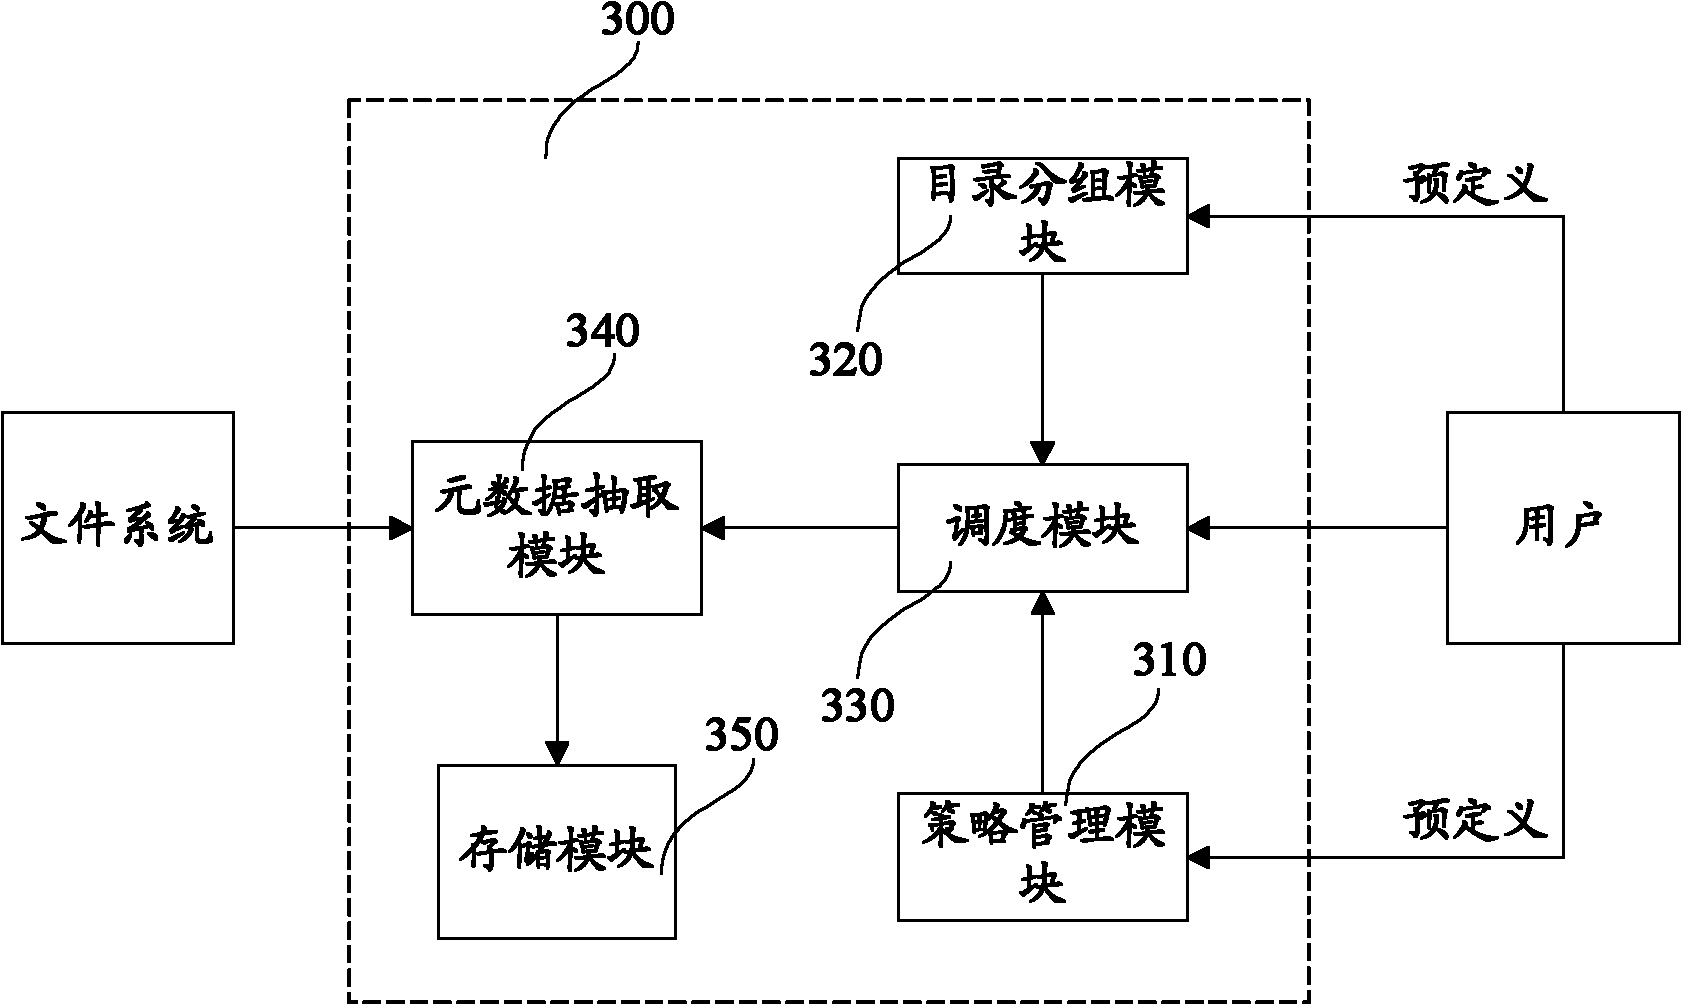 Method and device for extracting metadata of file system based on selective scanning